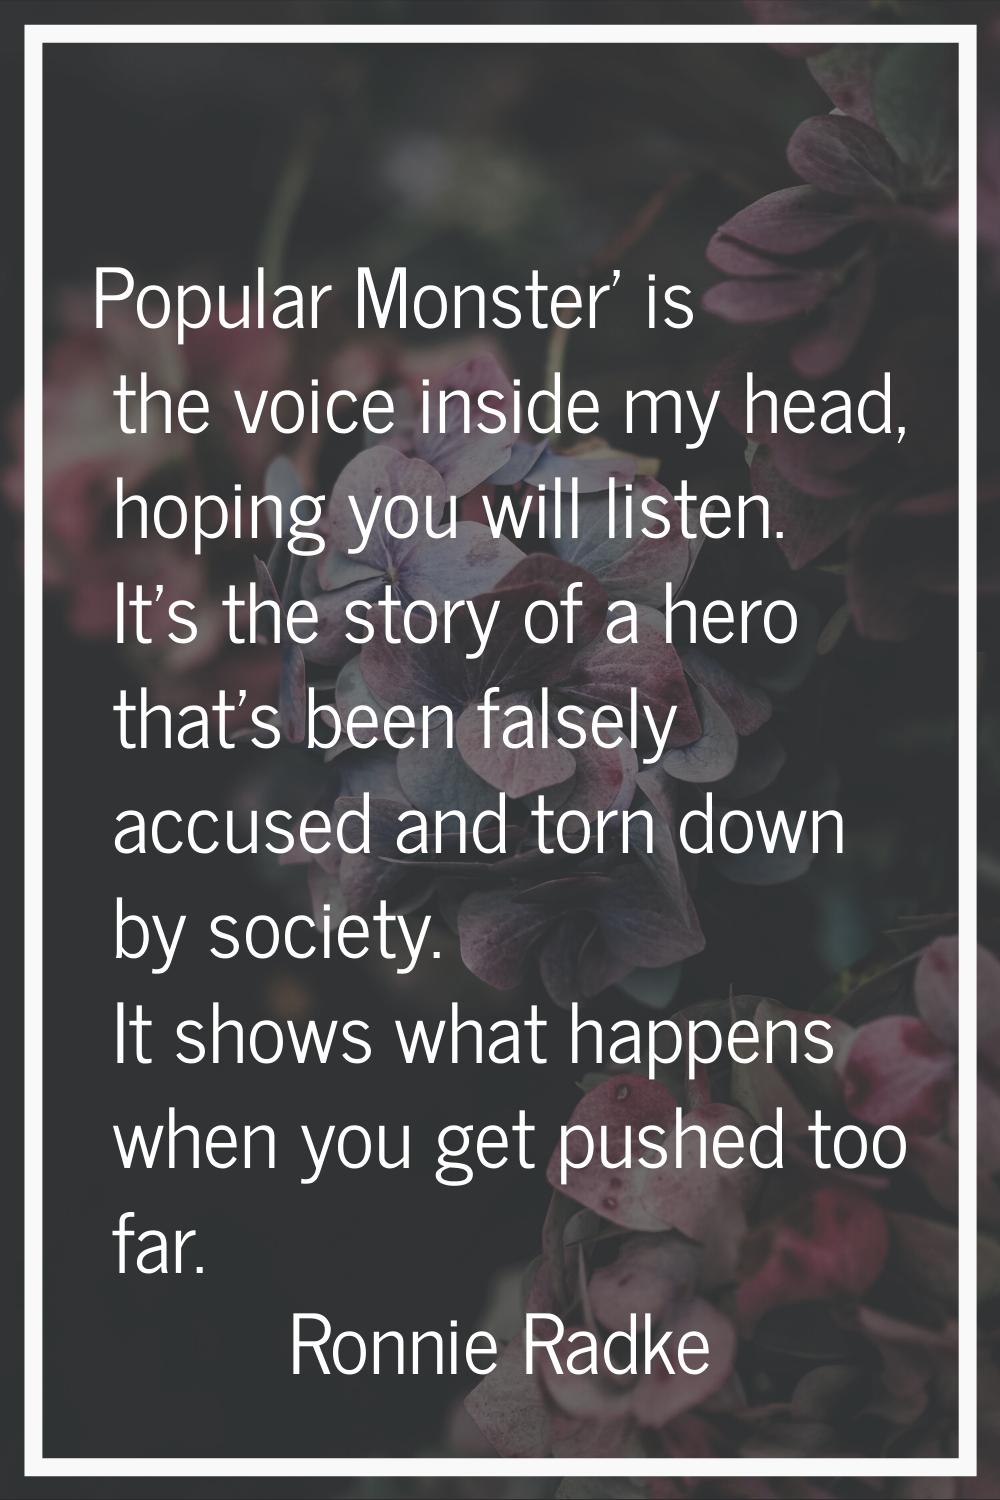 Popular Monster' is the voice inside my head, hoping you will listen. It's the story of a hero that